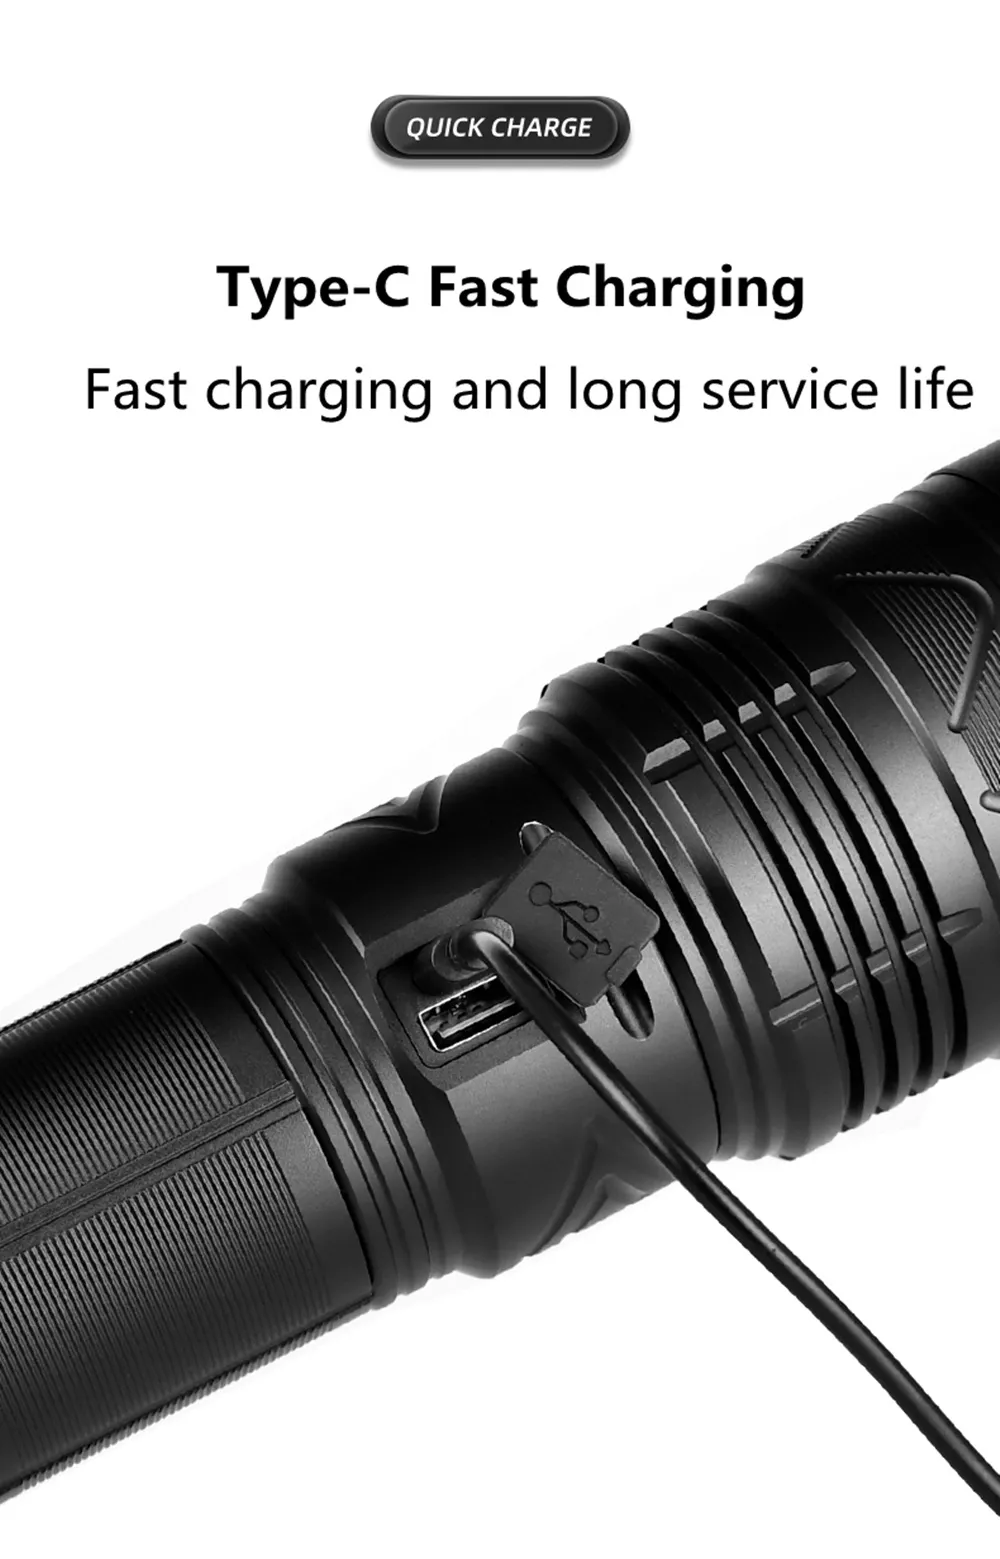 OEM High Power Led Flashlight Super Bright Long Range Torch Rechargeable Ultra Powerful Outdoor Tactical Hand Lamp Camping Lantern